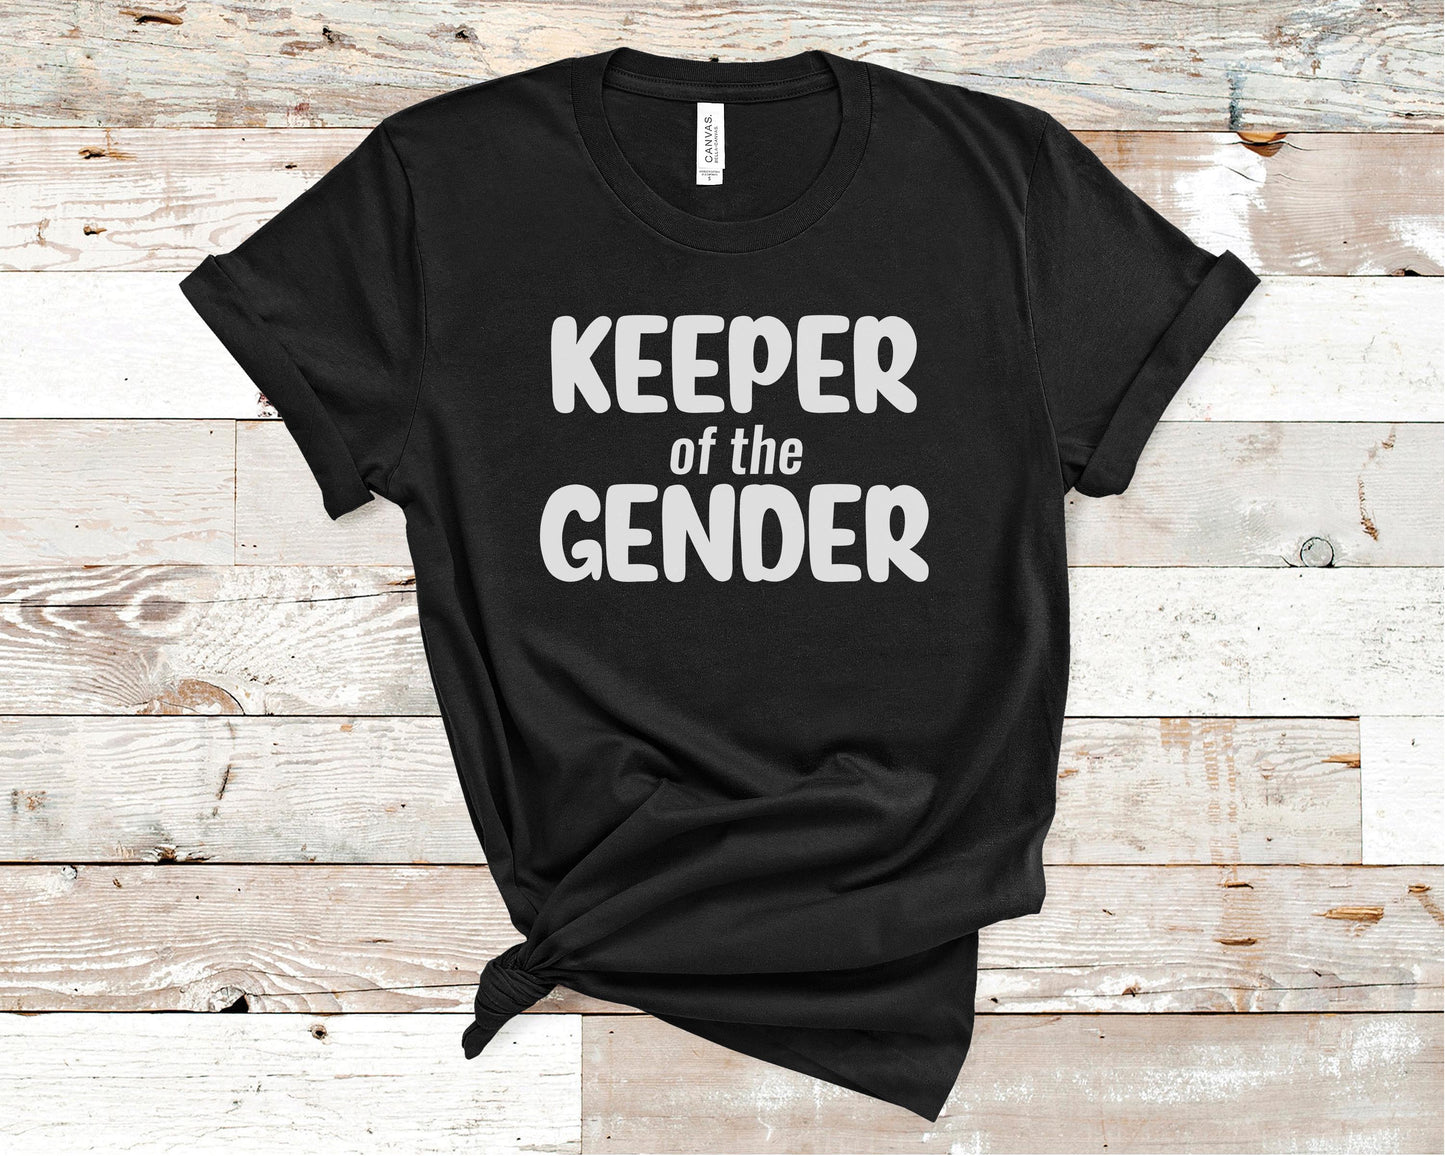 Keeper of the Gender - Pregnancy Announcement